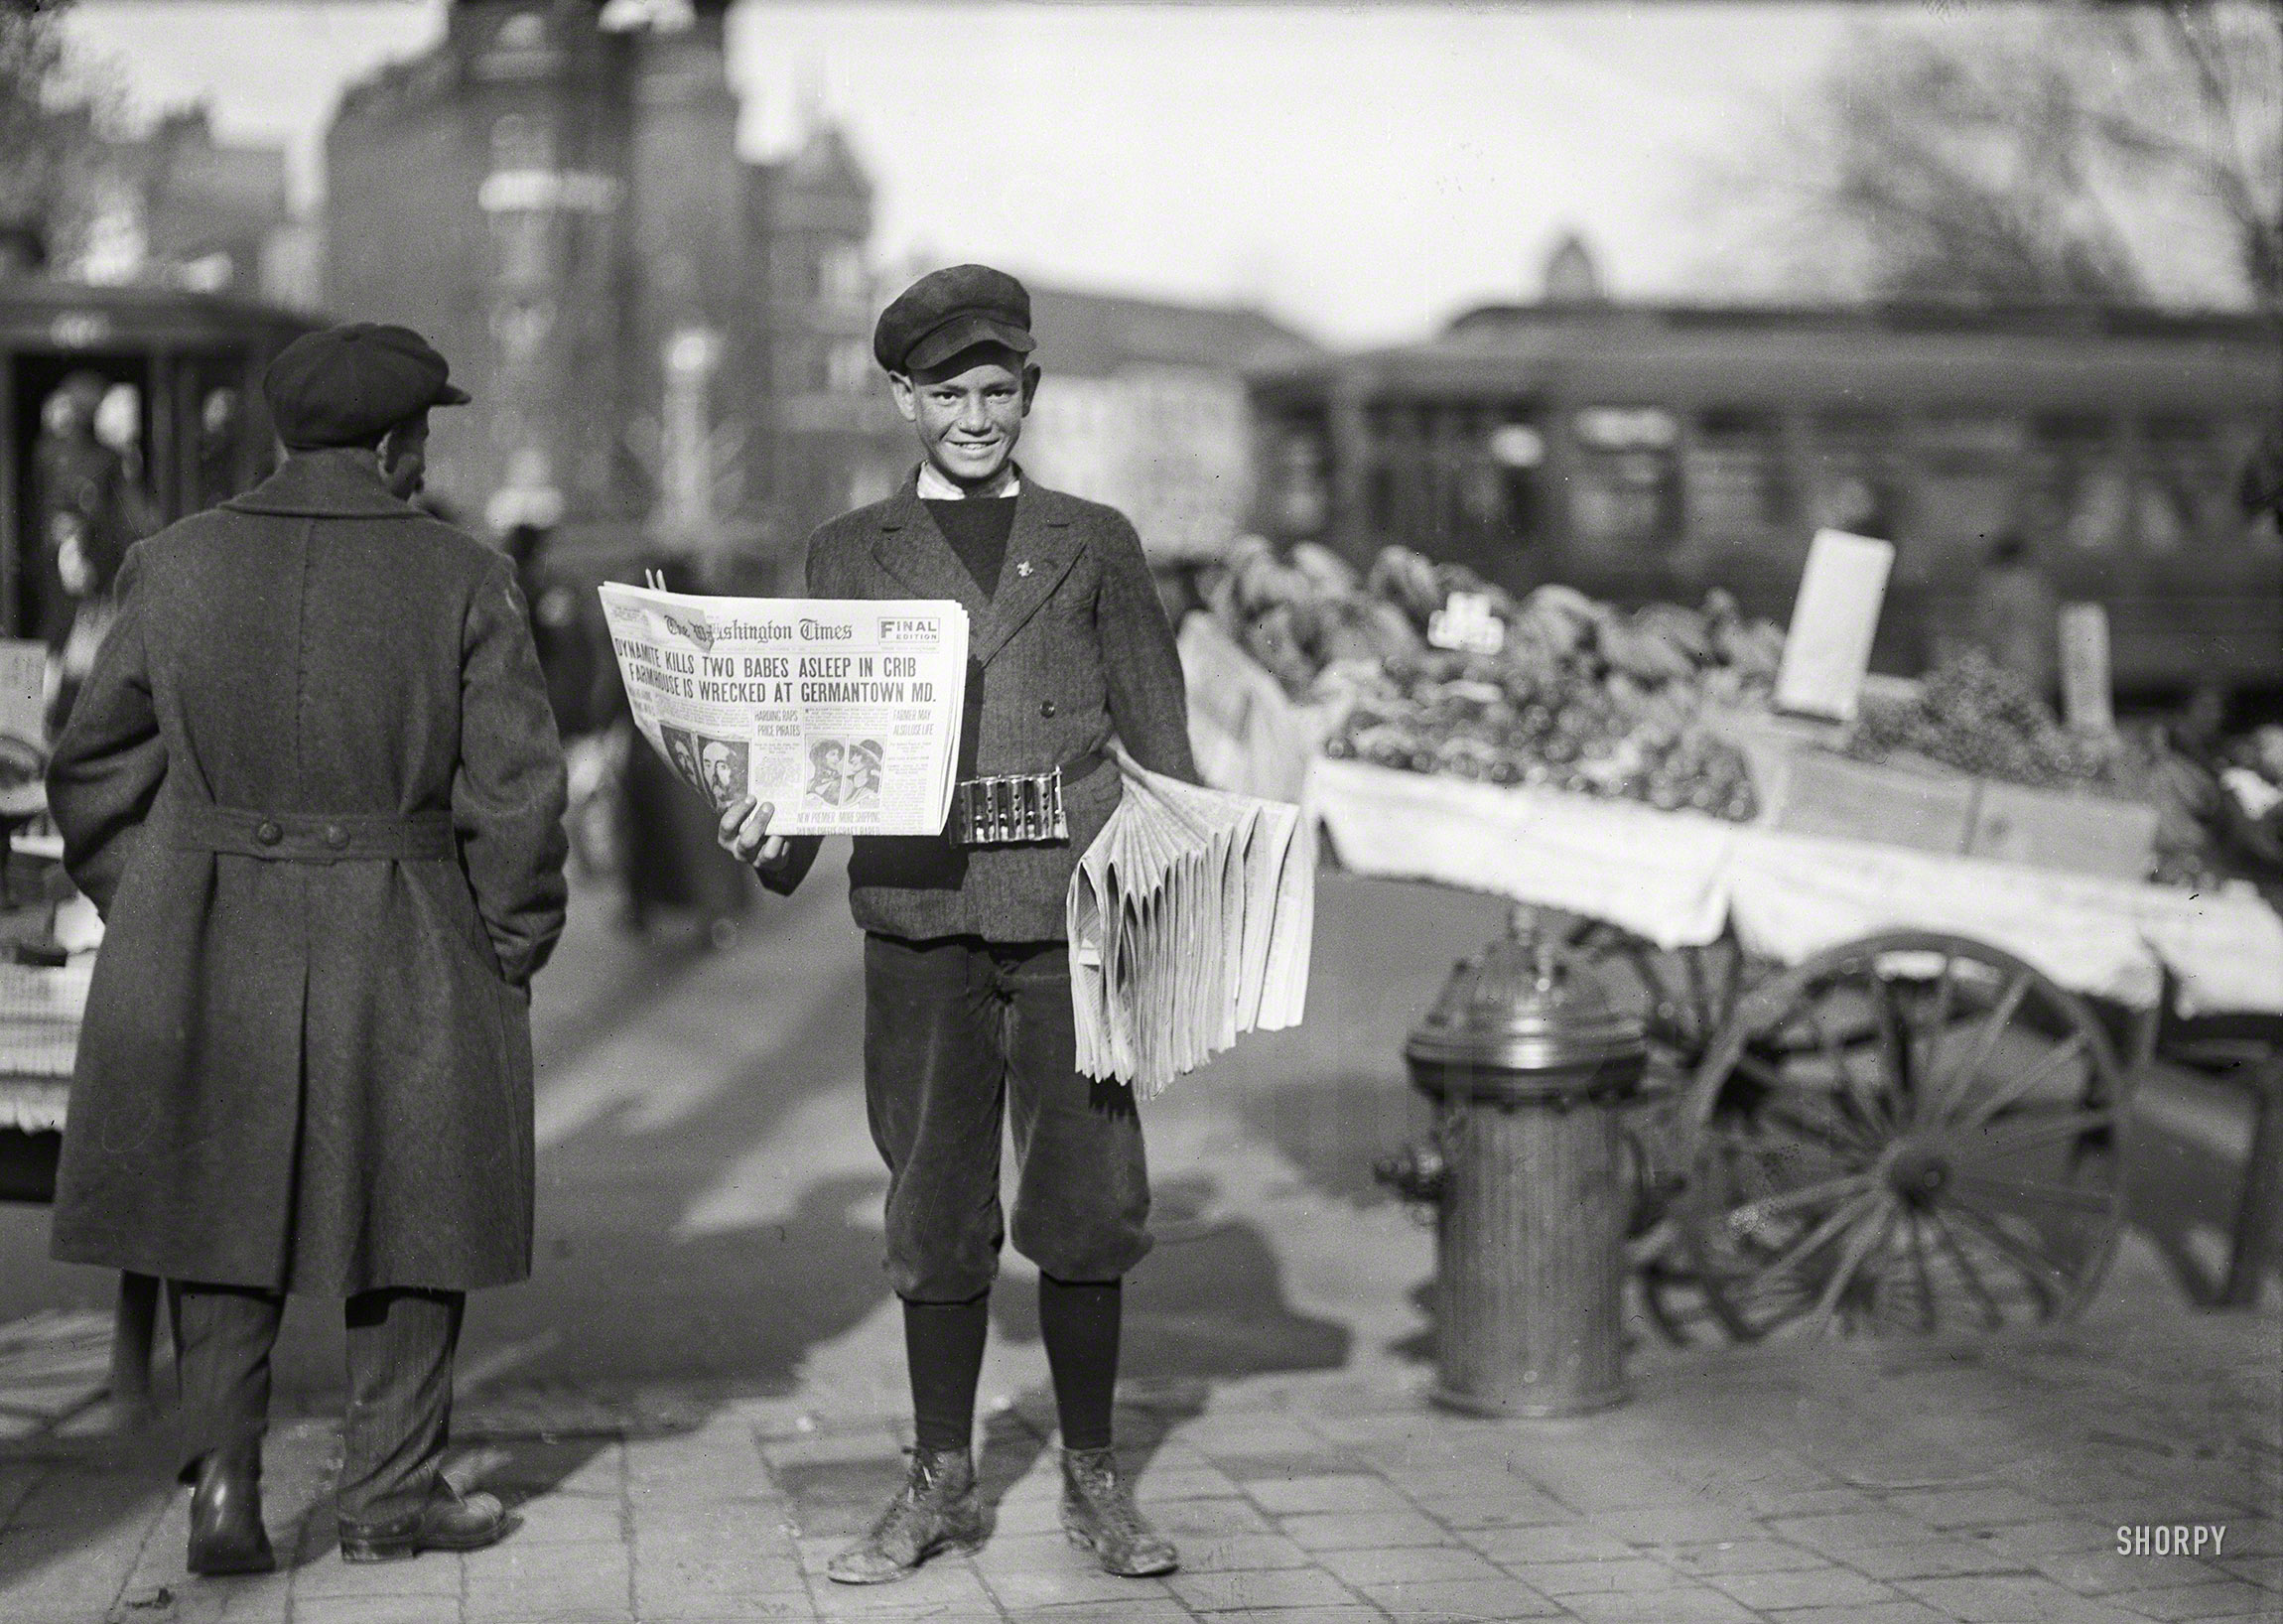 November 18, 1920. "Newsboy holding the Washington Times." Whose banner headline, DYNAMITE KILLS TWO BABES ASLEEP IN CRIB, summarizes a lurid crime that literally rocked Montgomery County, Maryland, in the fall of 1920 when a house painter engaged in a political feud with his neighbor, farmhand James Bolton, dynamited his bungalow, killing the man along with the two small children of his housekeeper. Guy Vernon Thompson was hanged for the crime the following April. Harris & Ewing Collection glass negative. View full size.